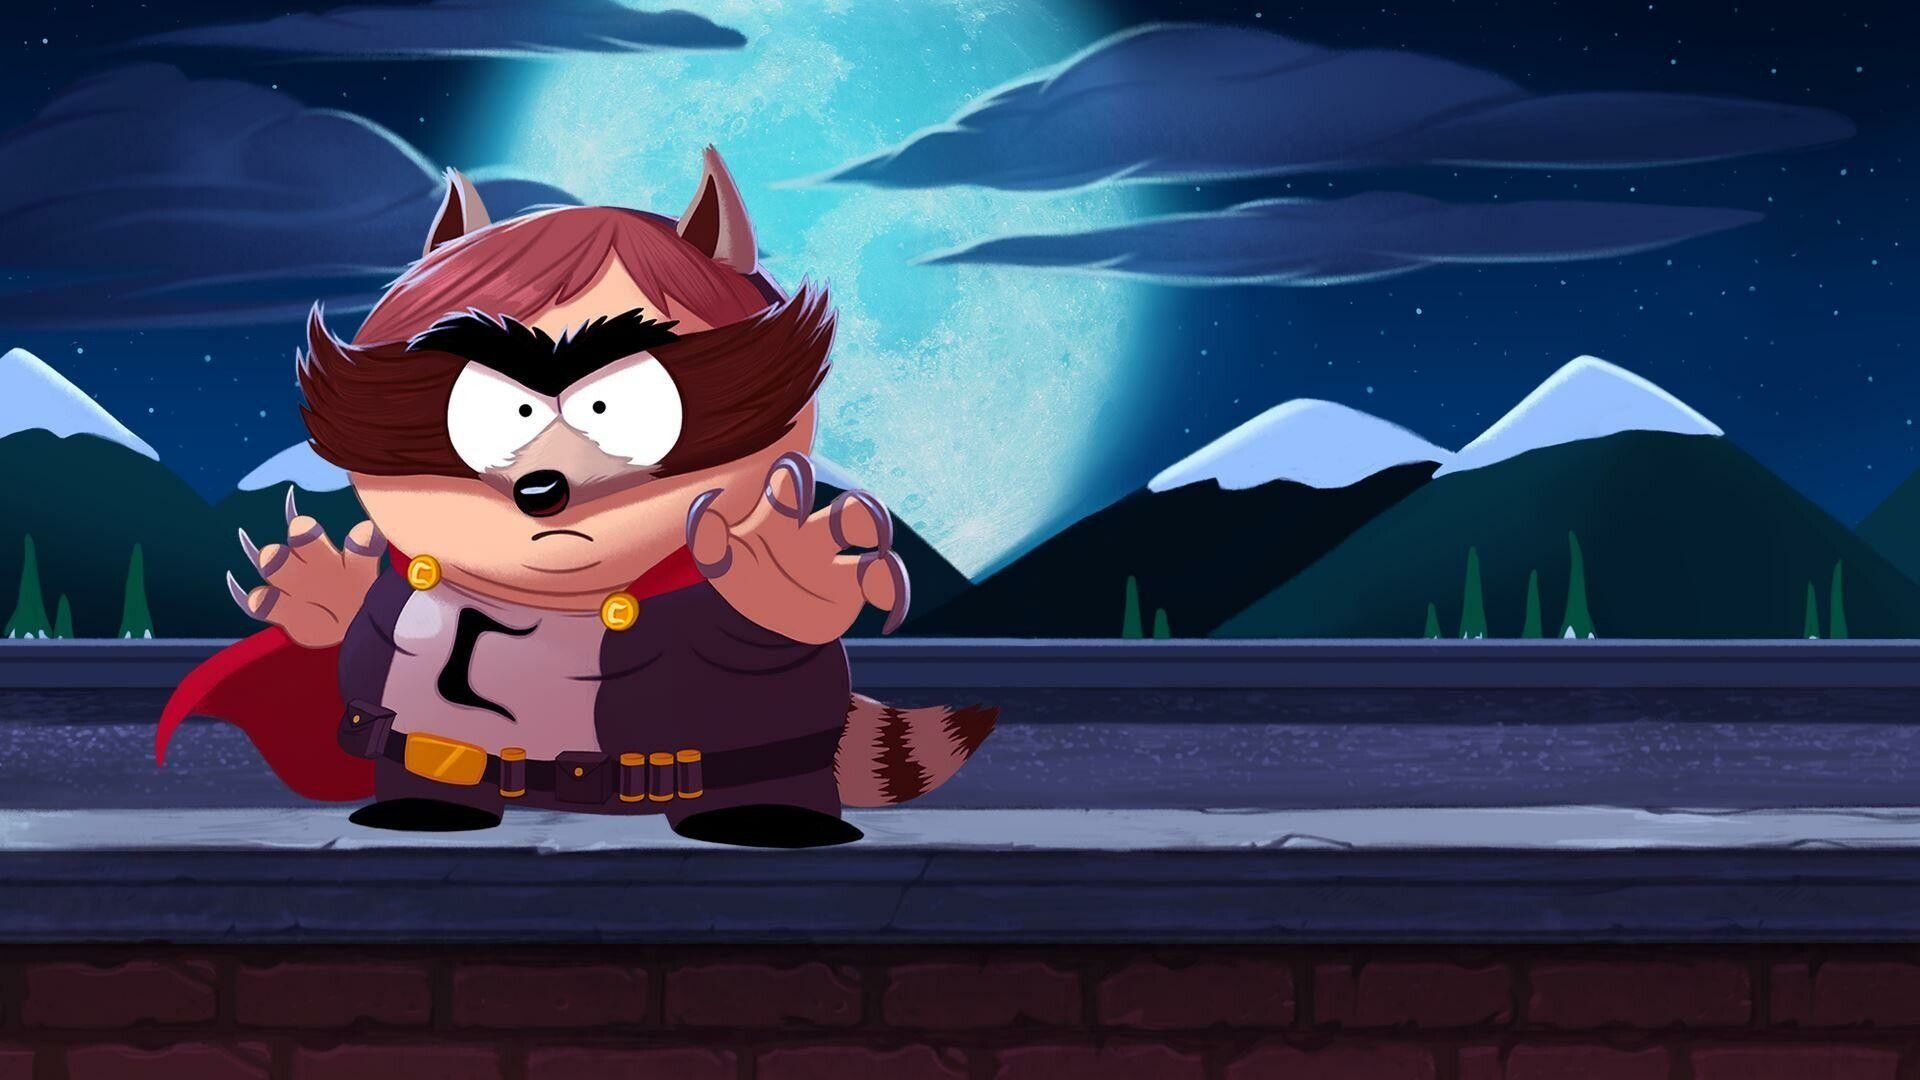 South Park: The Fractured But Whole, Eric Cartman as The Coon. 1920x1080 Full HD Background.